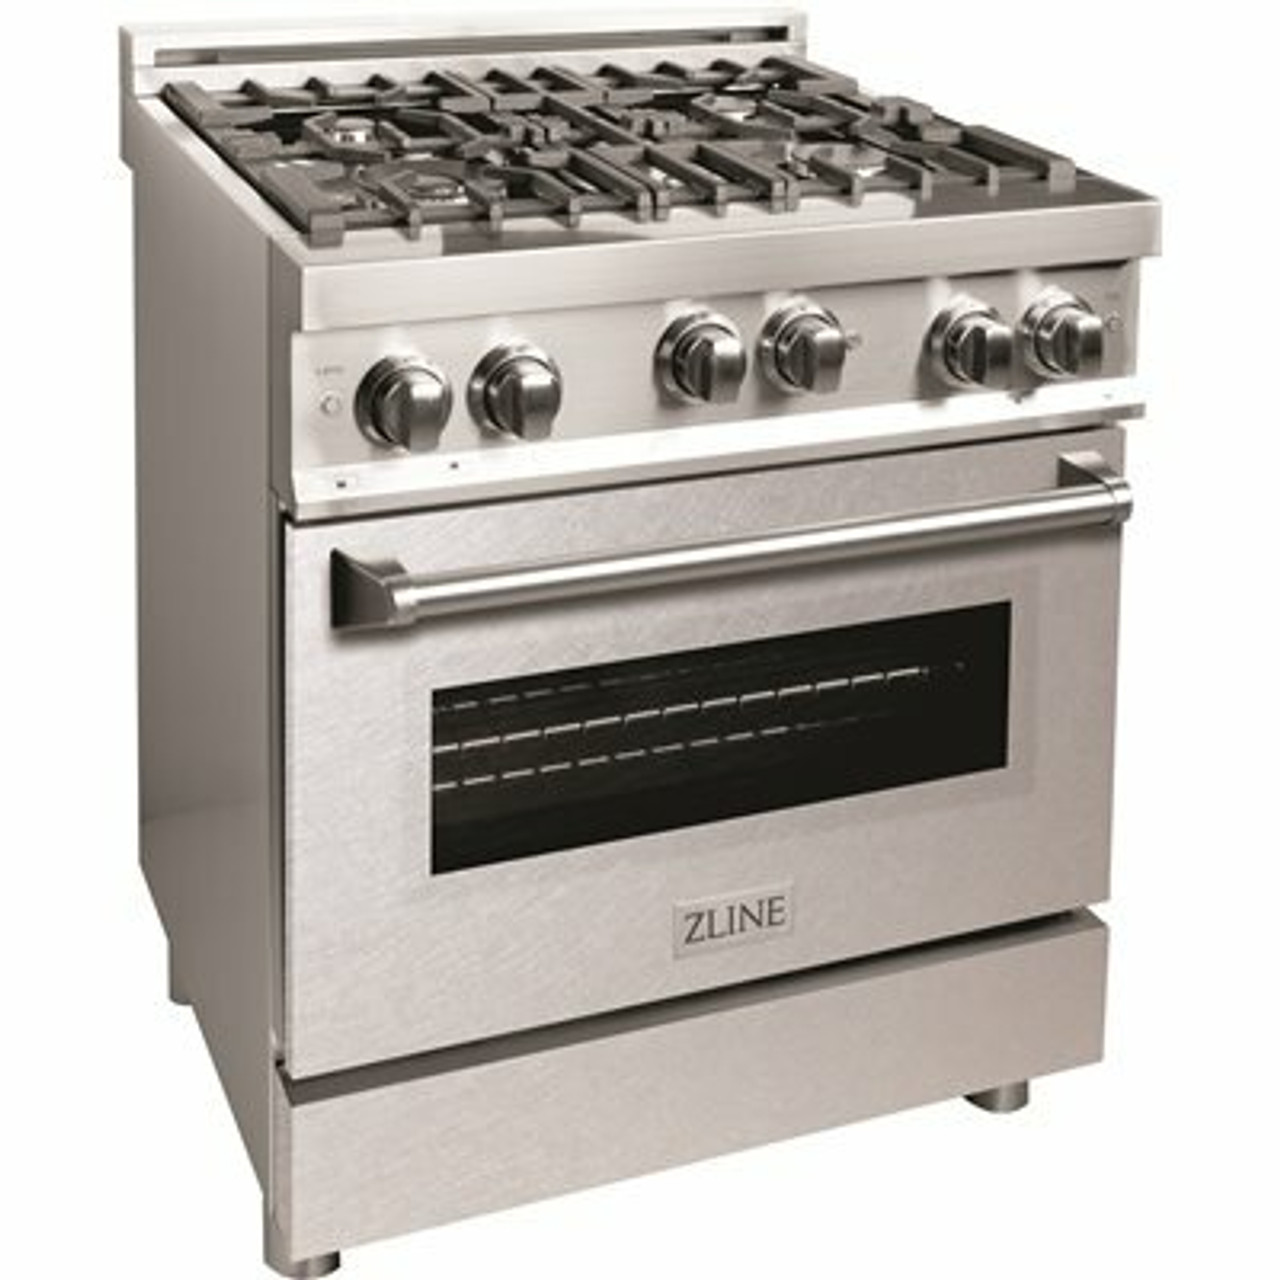 Zline 30 In. 4.0 Cu.Ft. Gas Range With Convection Gas Oven In Stainless Steel With Durasnow Stainless Door (Rg-Sn-30)